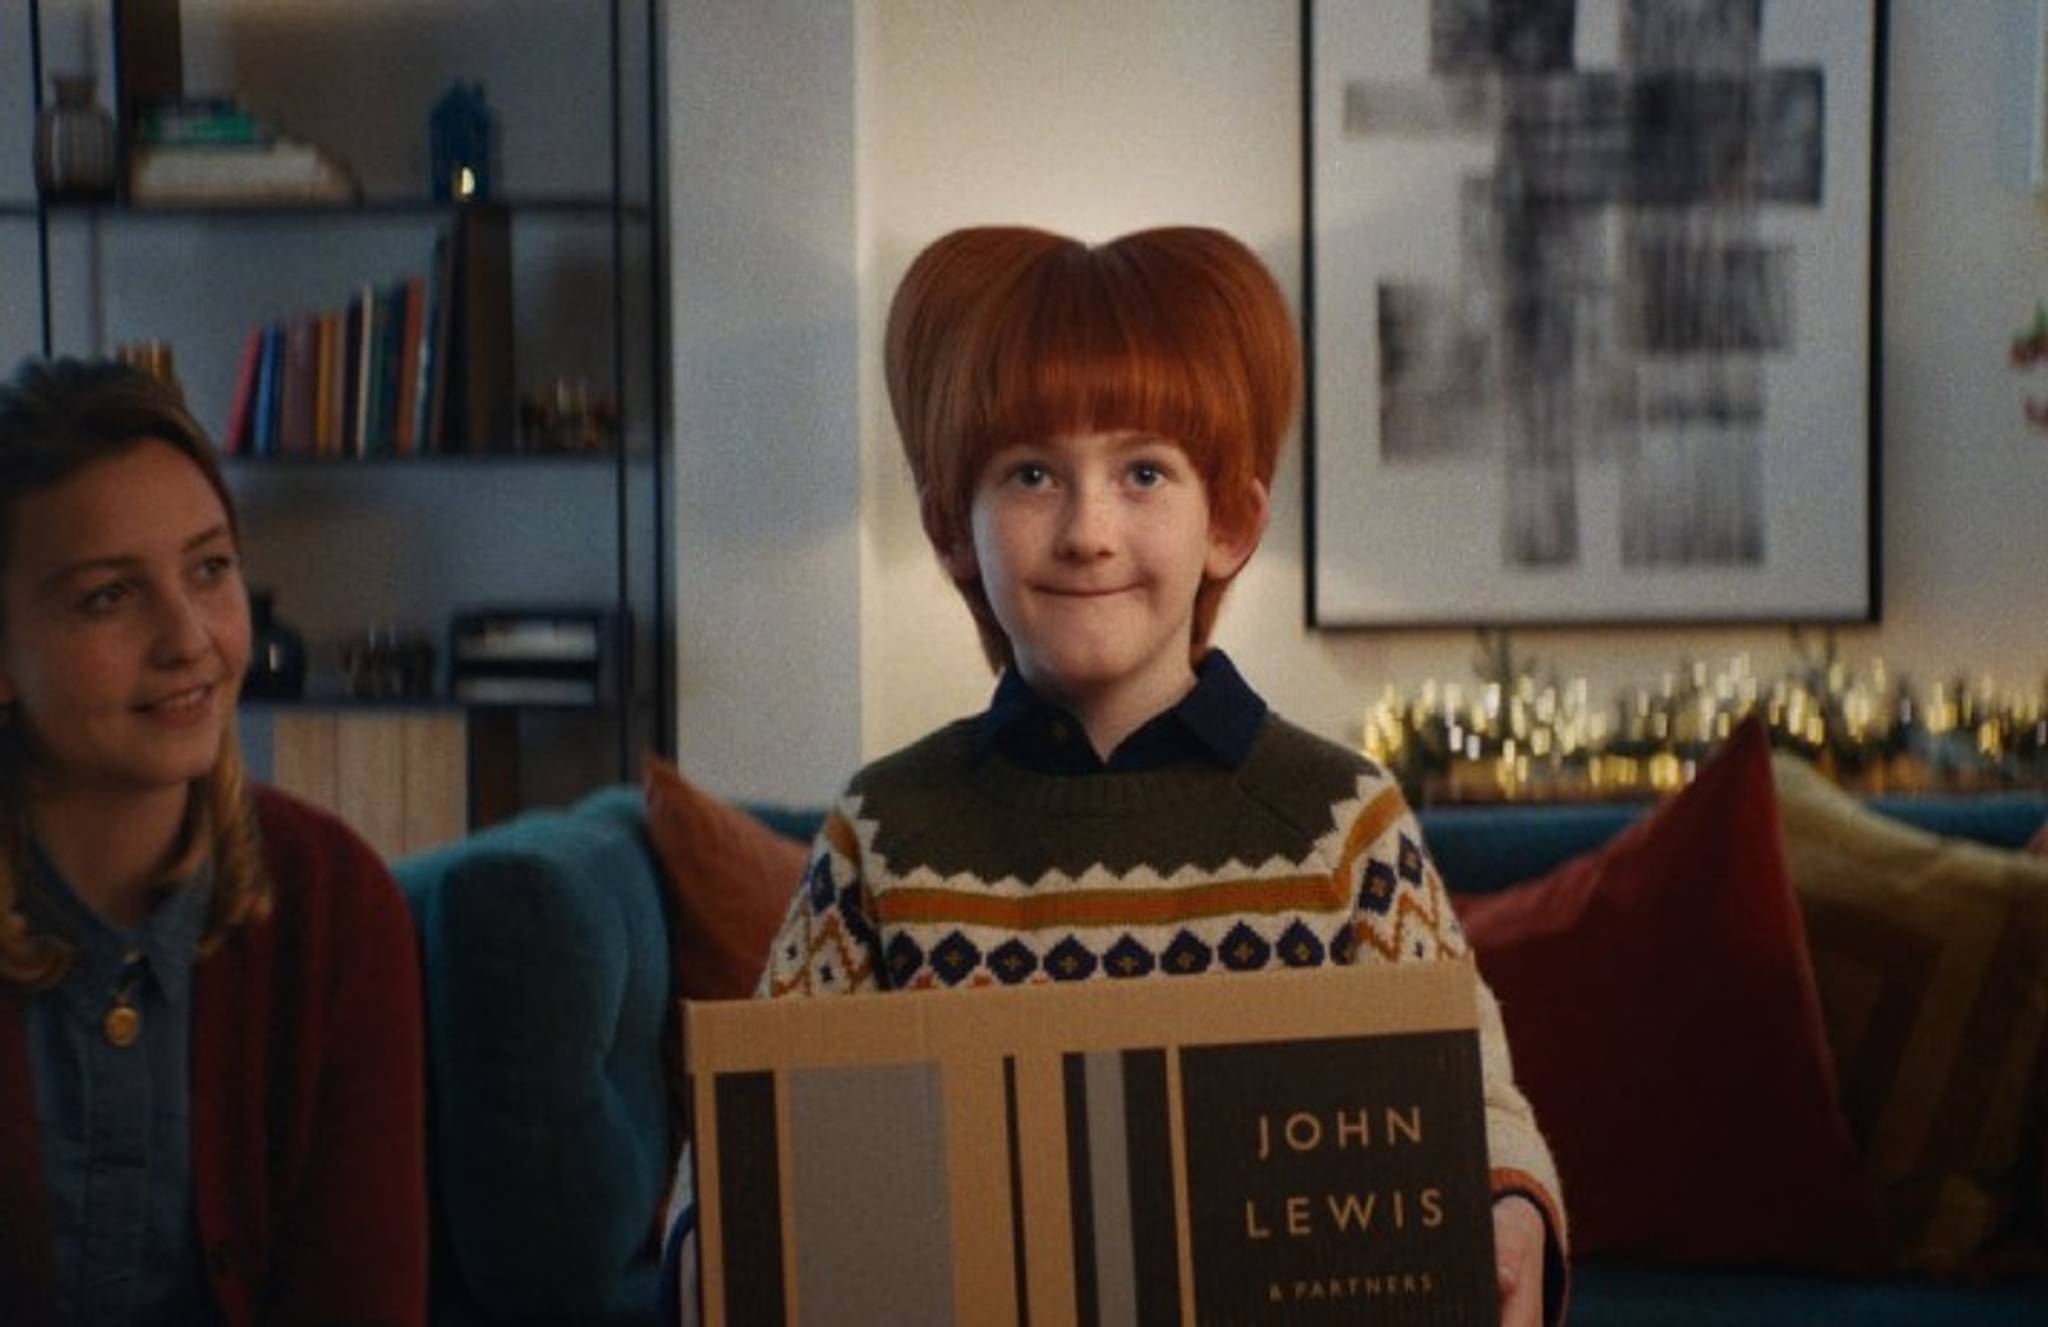 John Lewis Xmas ad centres on gifting love, not presents